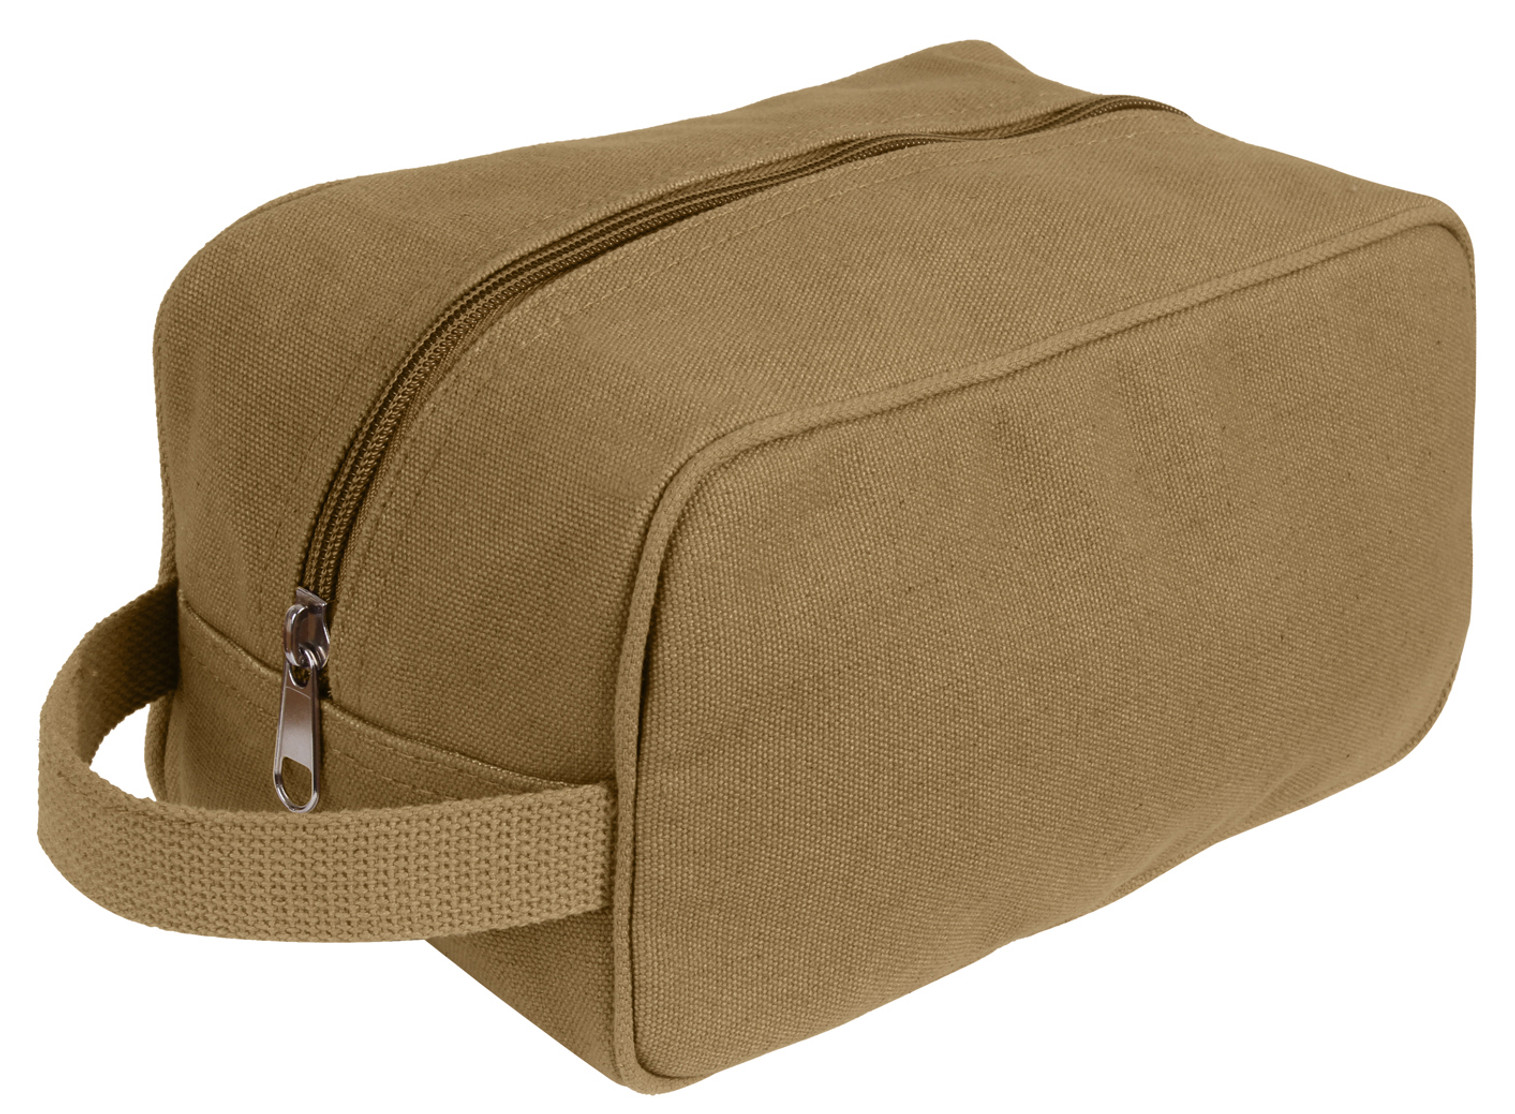 Rothco Canvas Travel Kit - Coyote Brown